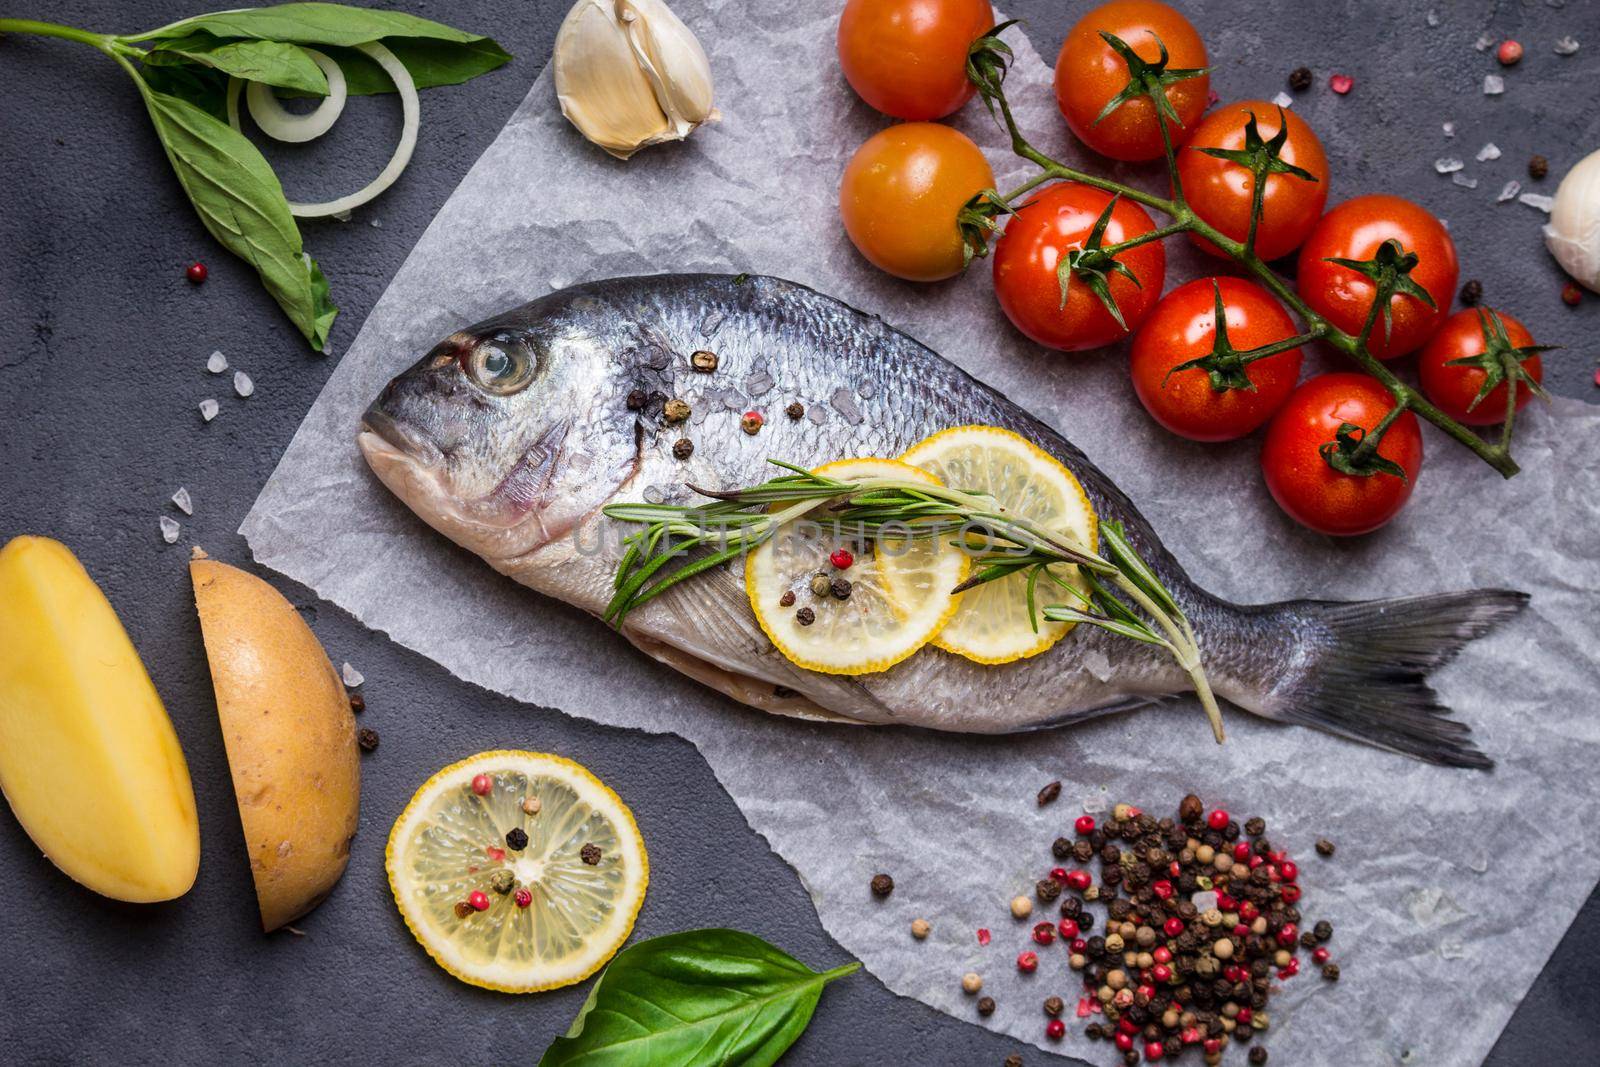 Raw whole fish with fresh ingredients ready to cook. Sea bream, lemon, herbs, potato, tomatoes, garlic, spices. Ingredients for cooking on dark rustic background. Diet and healthy food. Top view